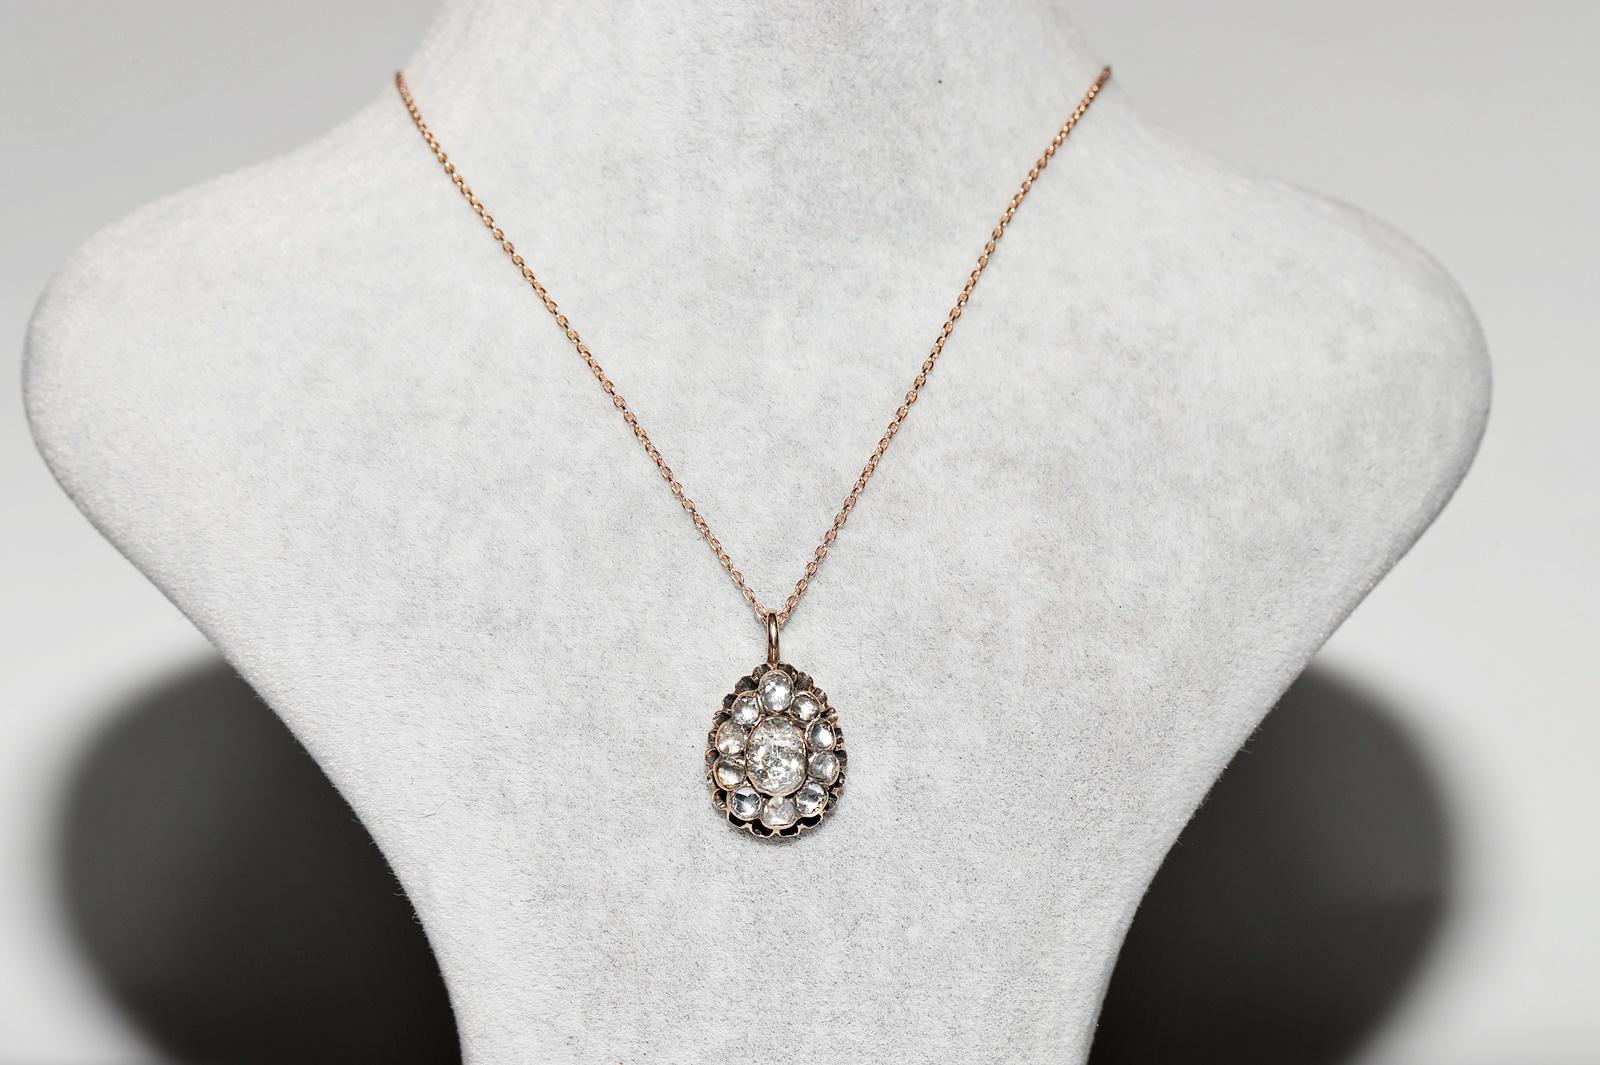 In very good condition.
Total weight is  4.2 grams.
Totally weight is diamond about 1 ct.
Totally lenght is chain 40 cm.
Pendant is original chain is new  and we can extend it.
Please contact for any questions.